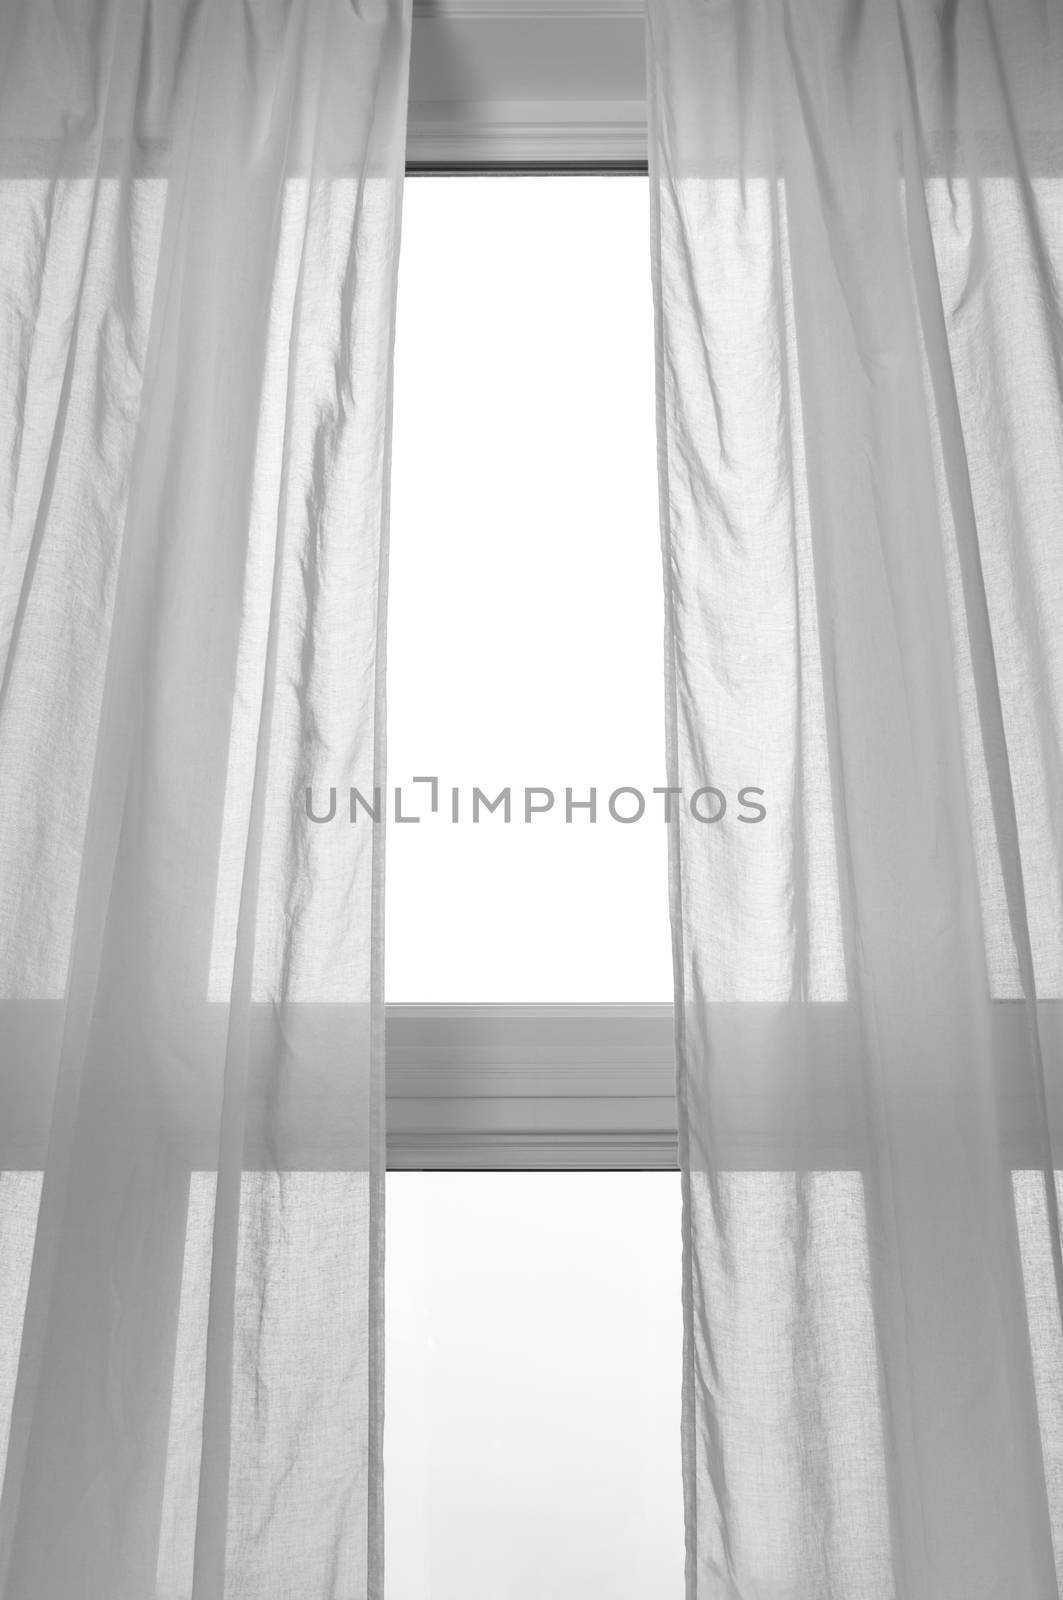 Light coming through the window with white transparent curtains.